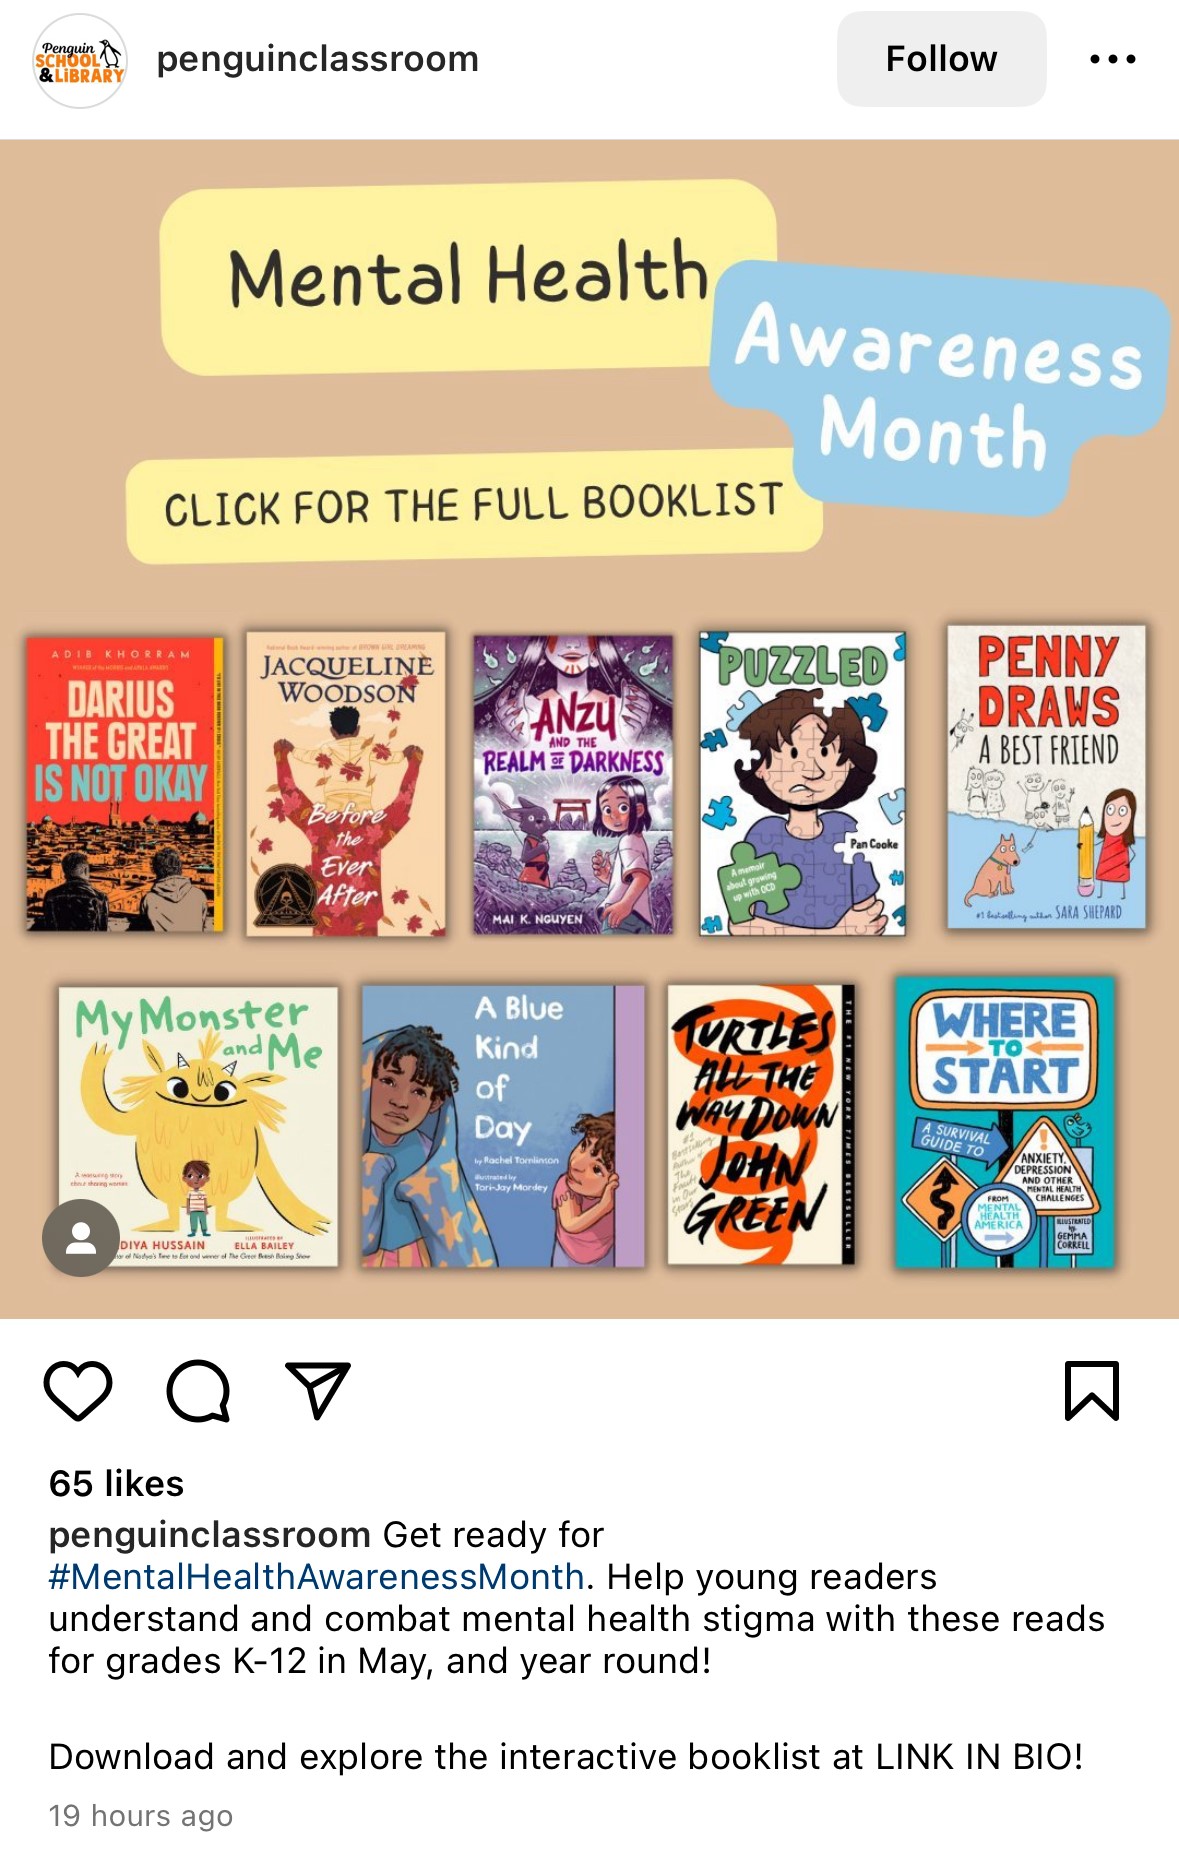 Penguin Classroom shared a social post recommending mental health books for young readers.